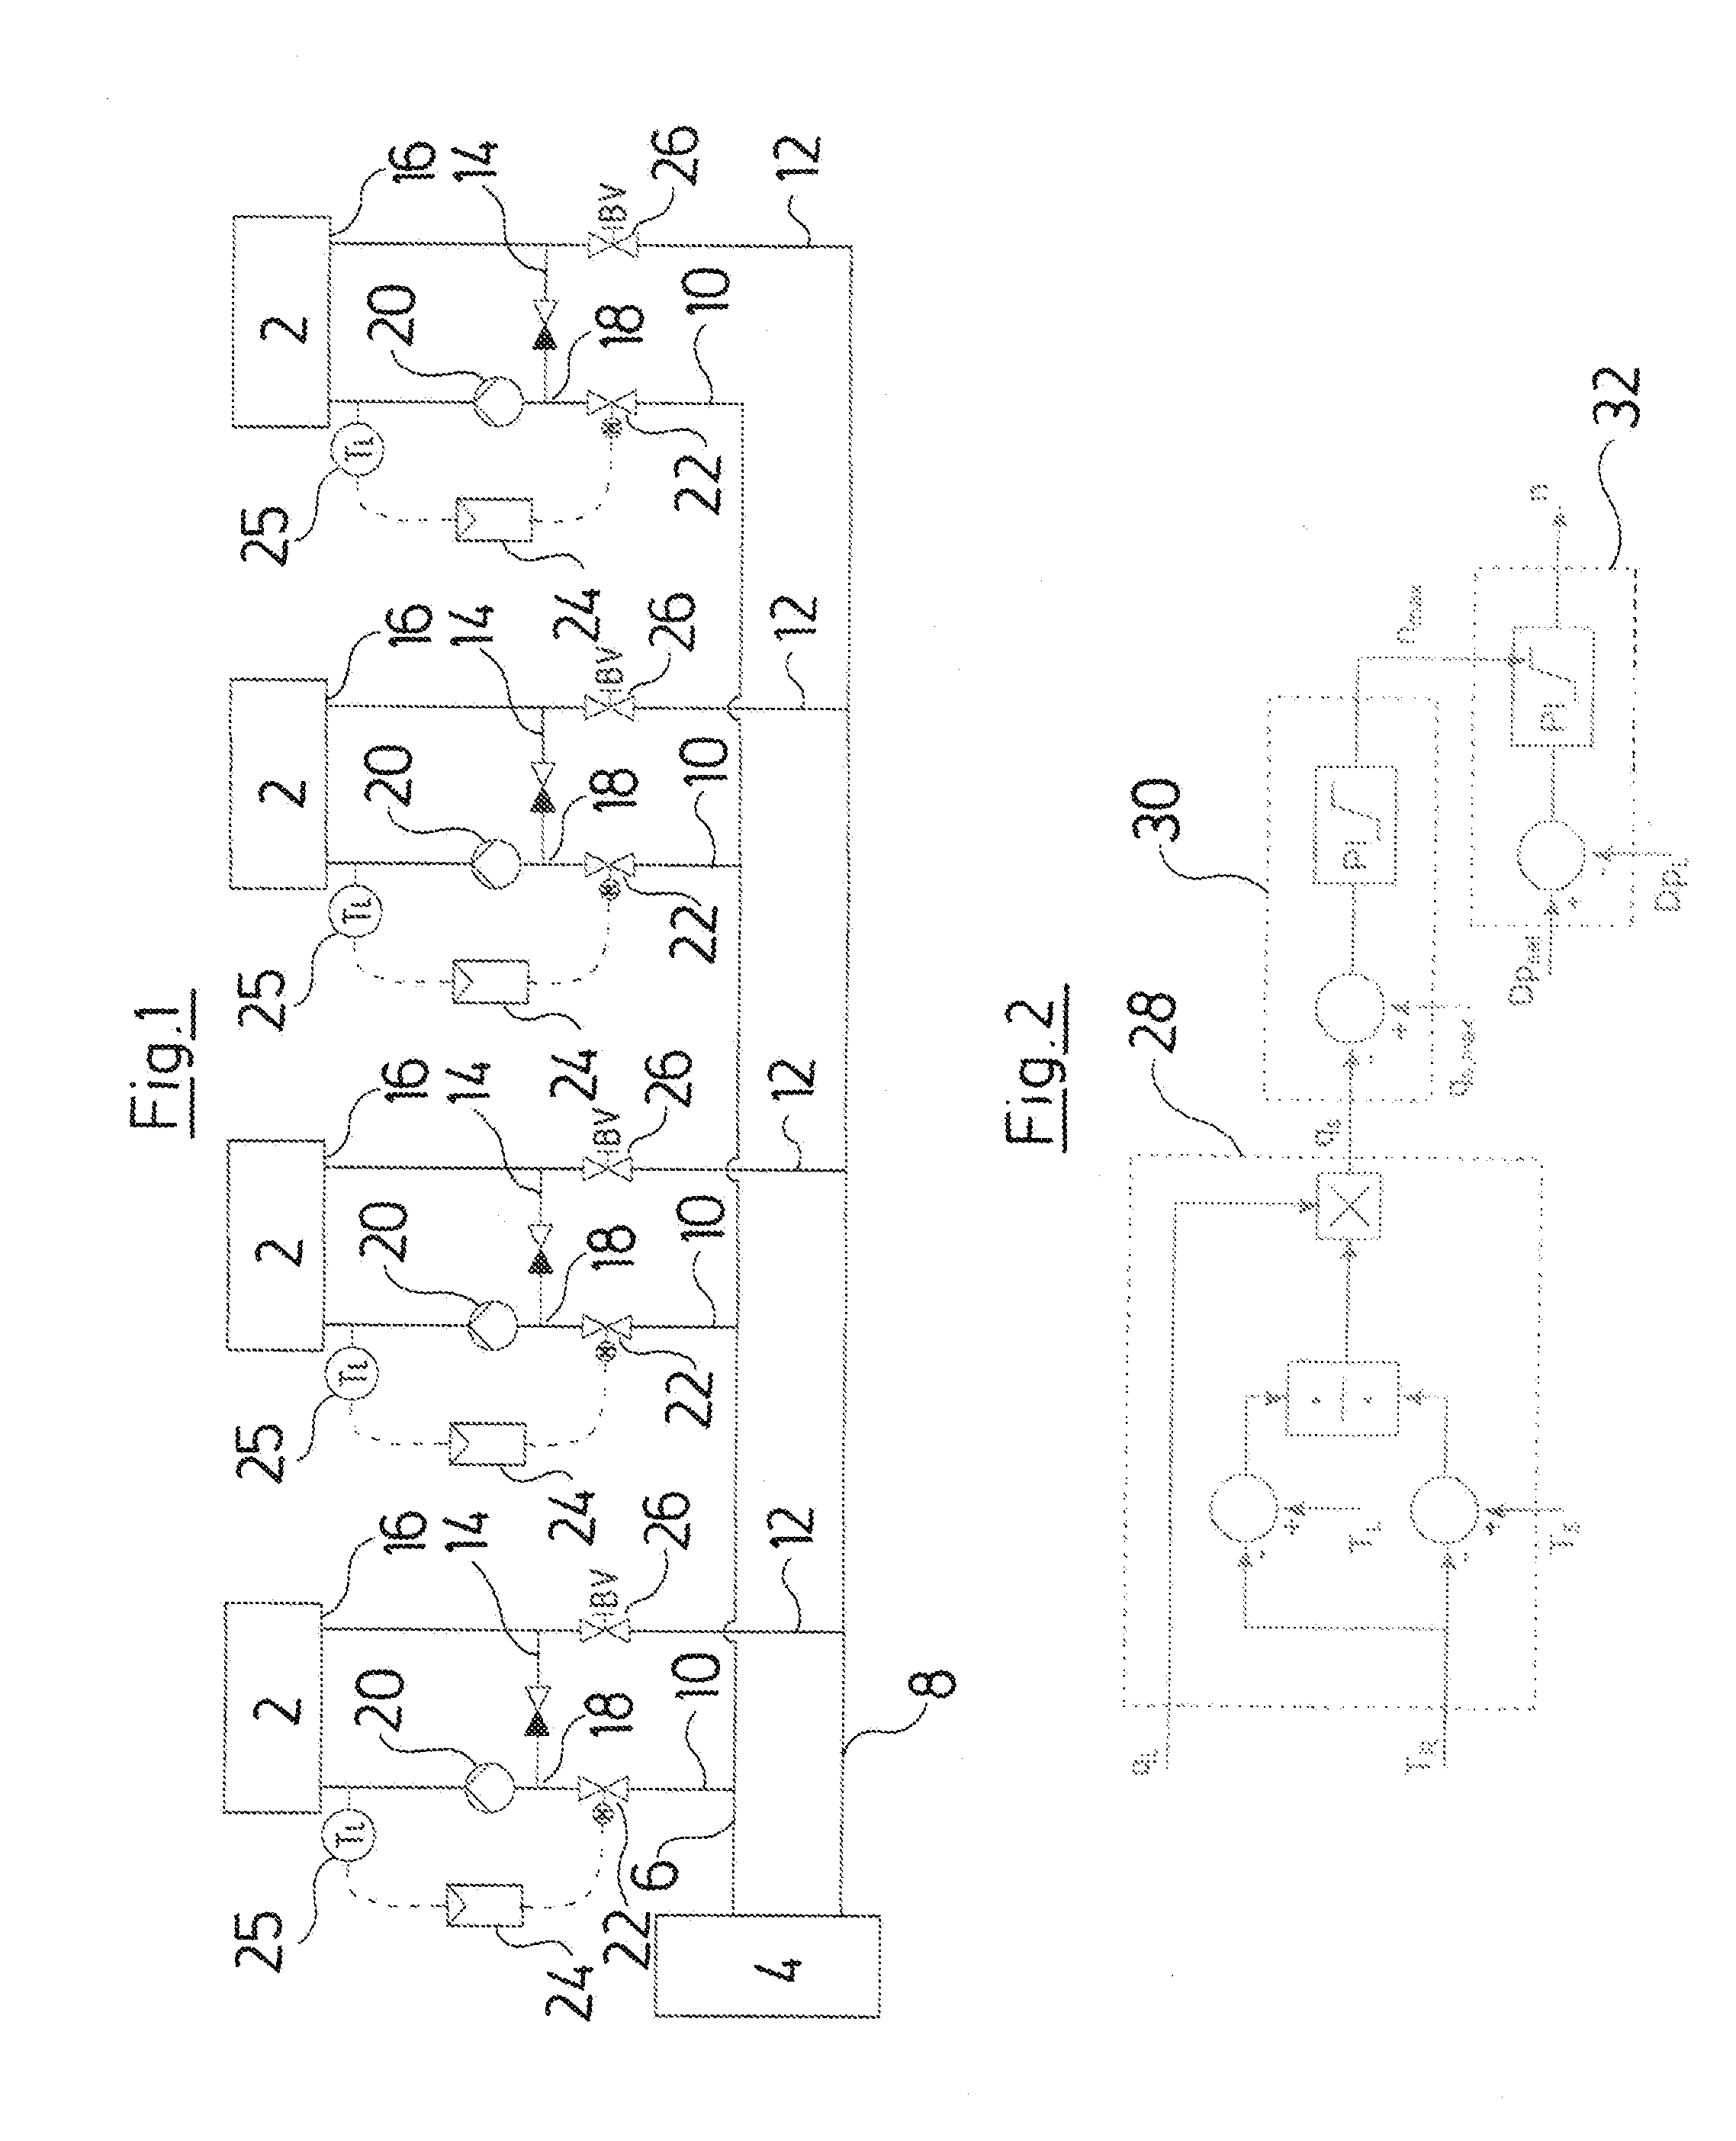 Method for limiting a supply flow in a heat transfer system